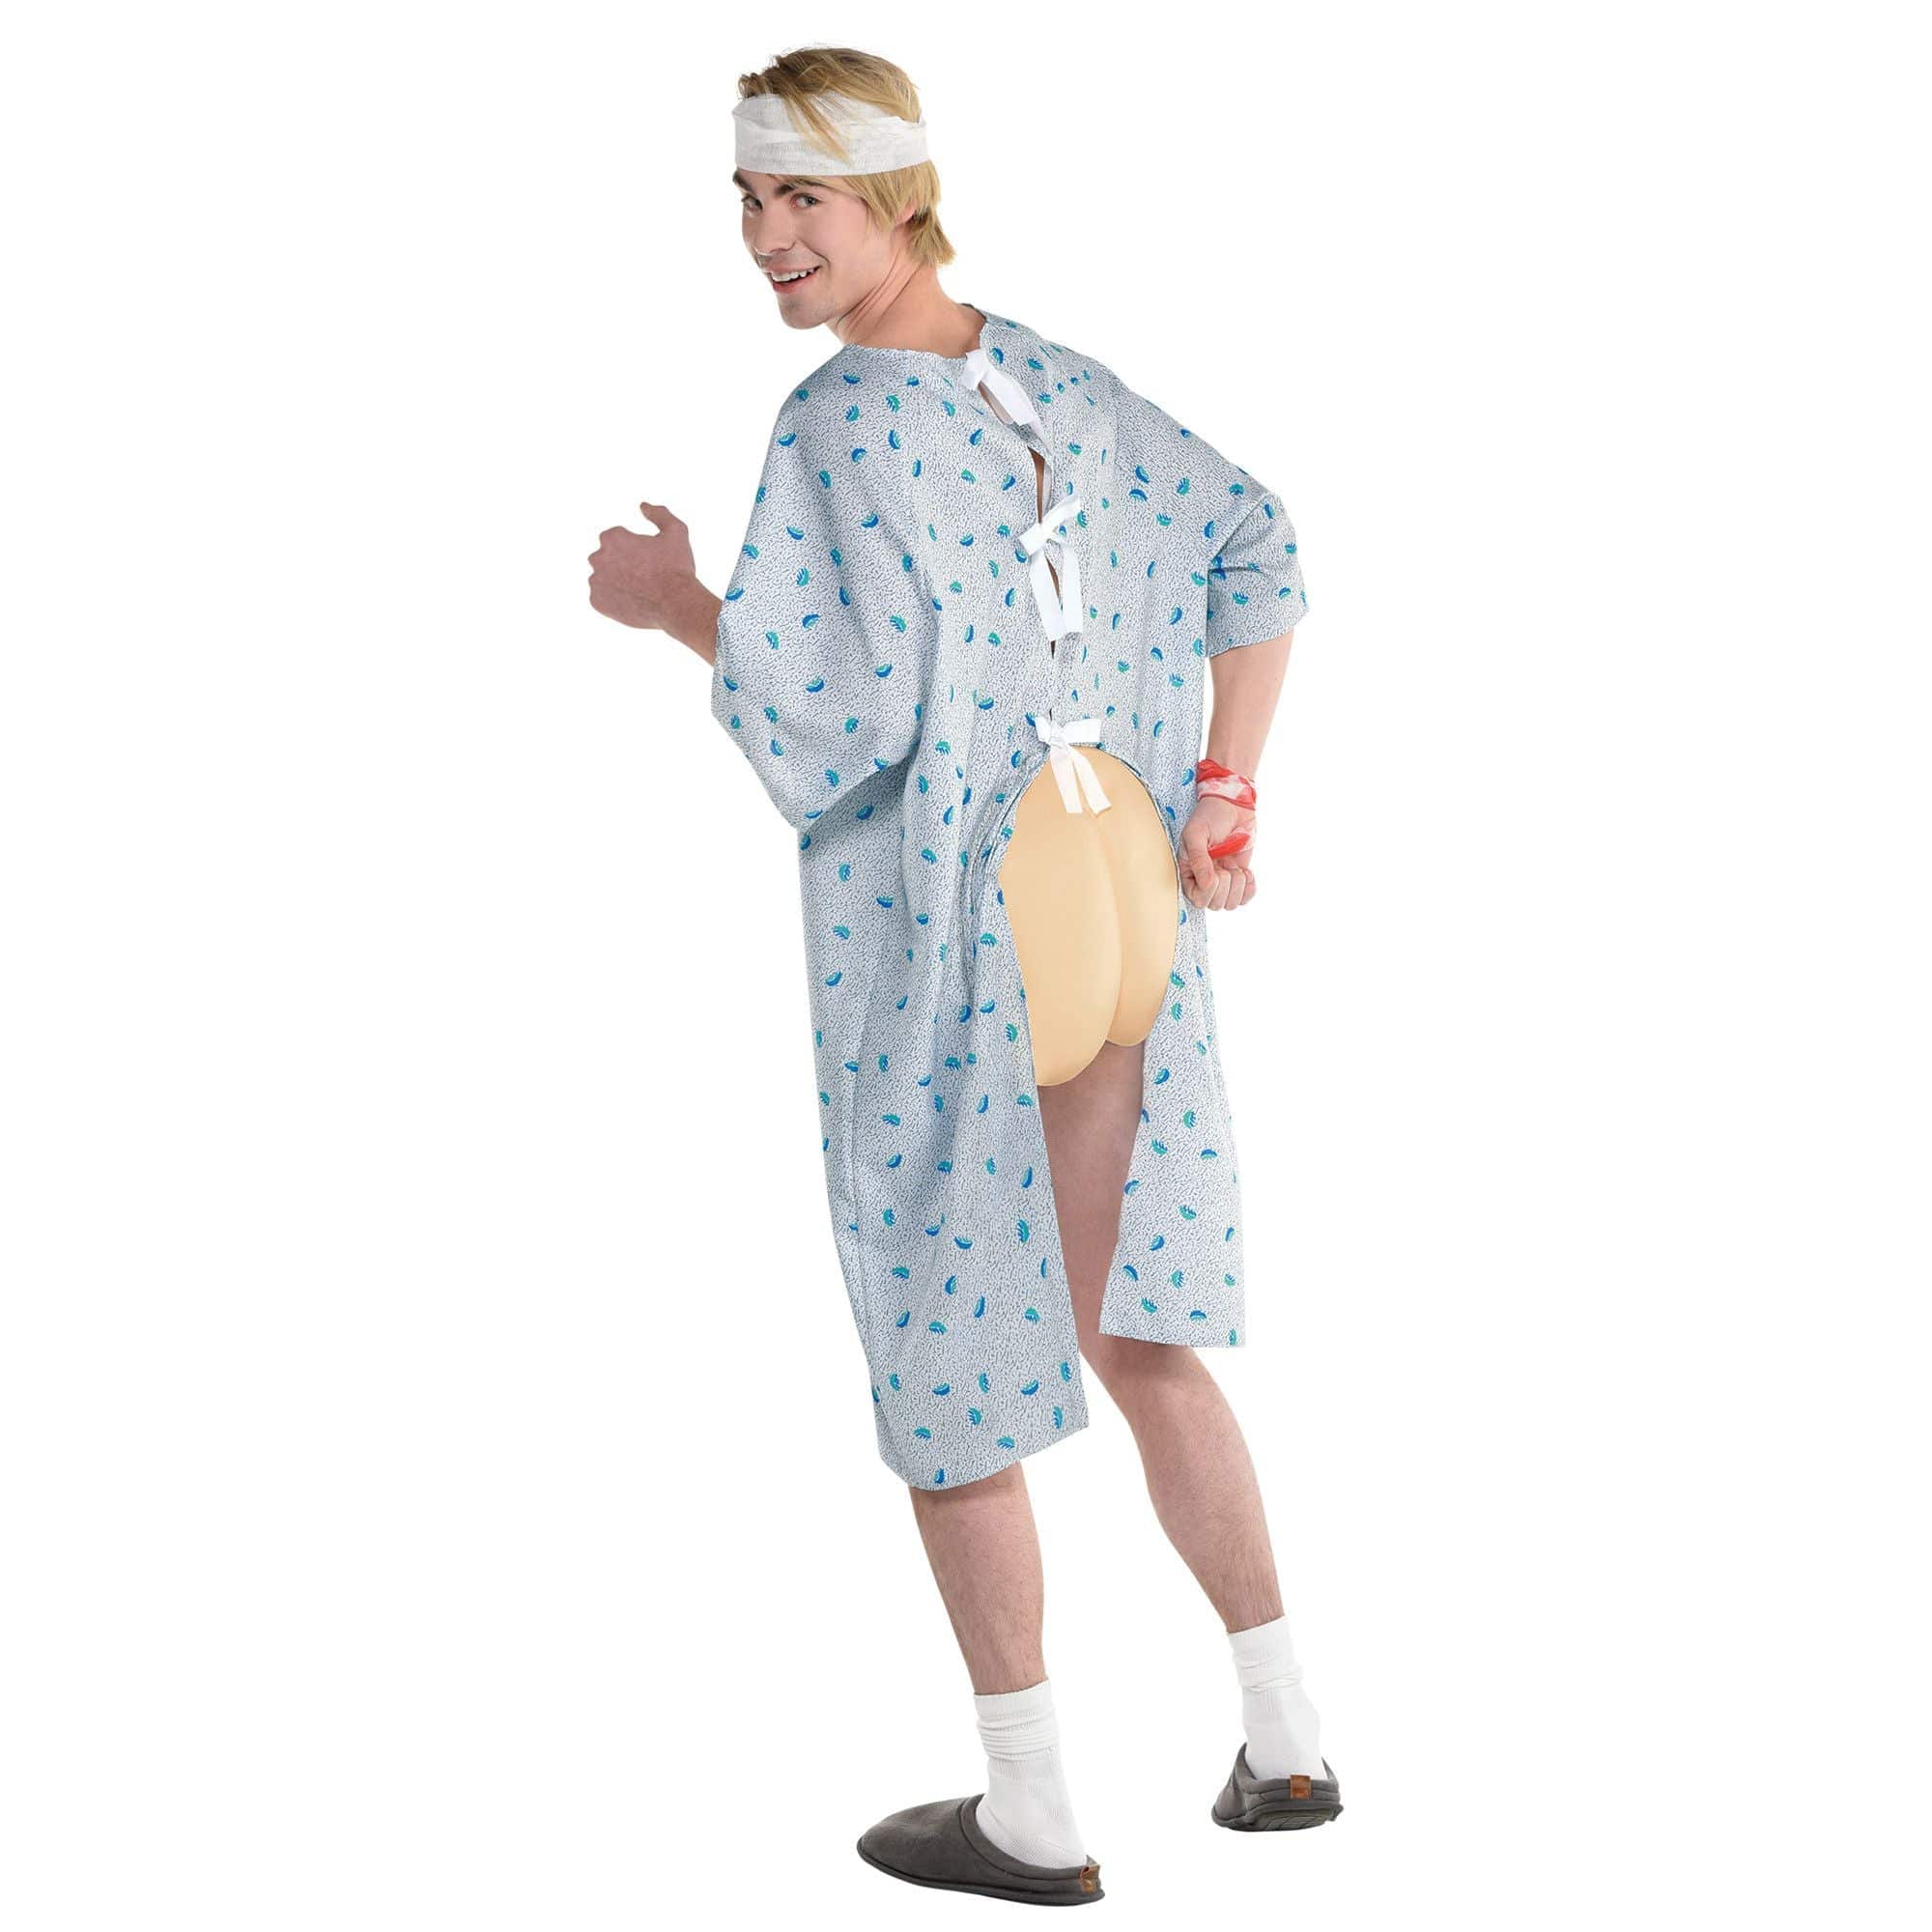 Amscan COSTUMES Patient Gown Costume